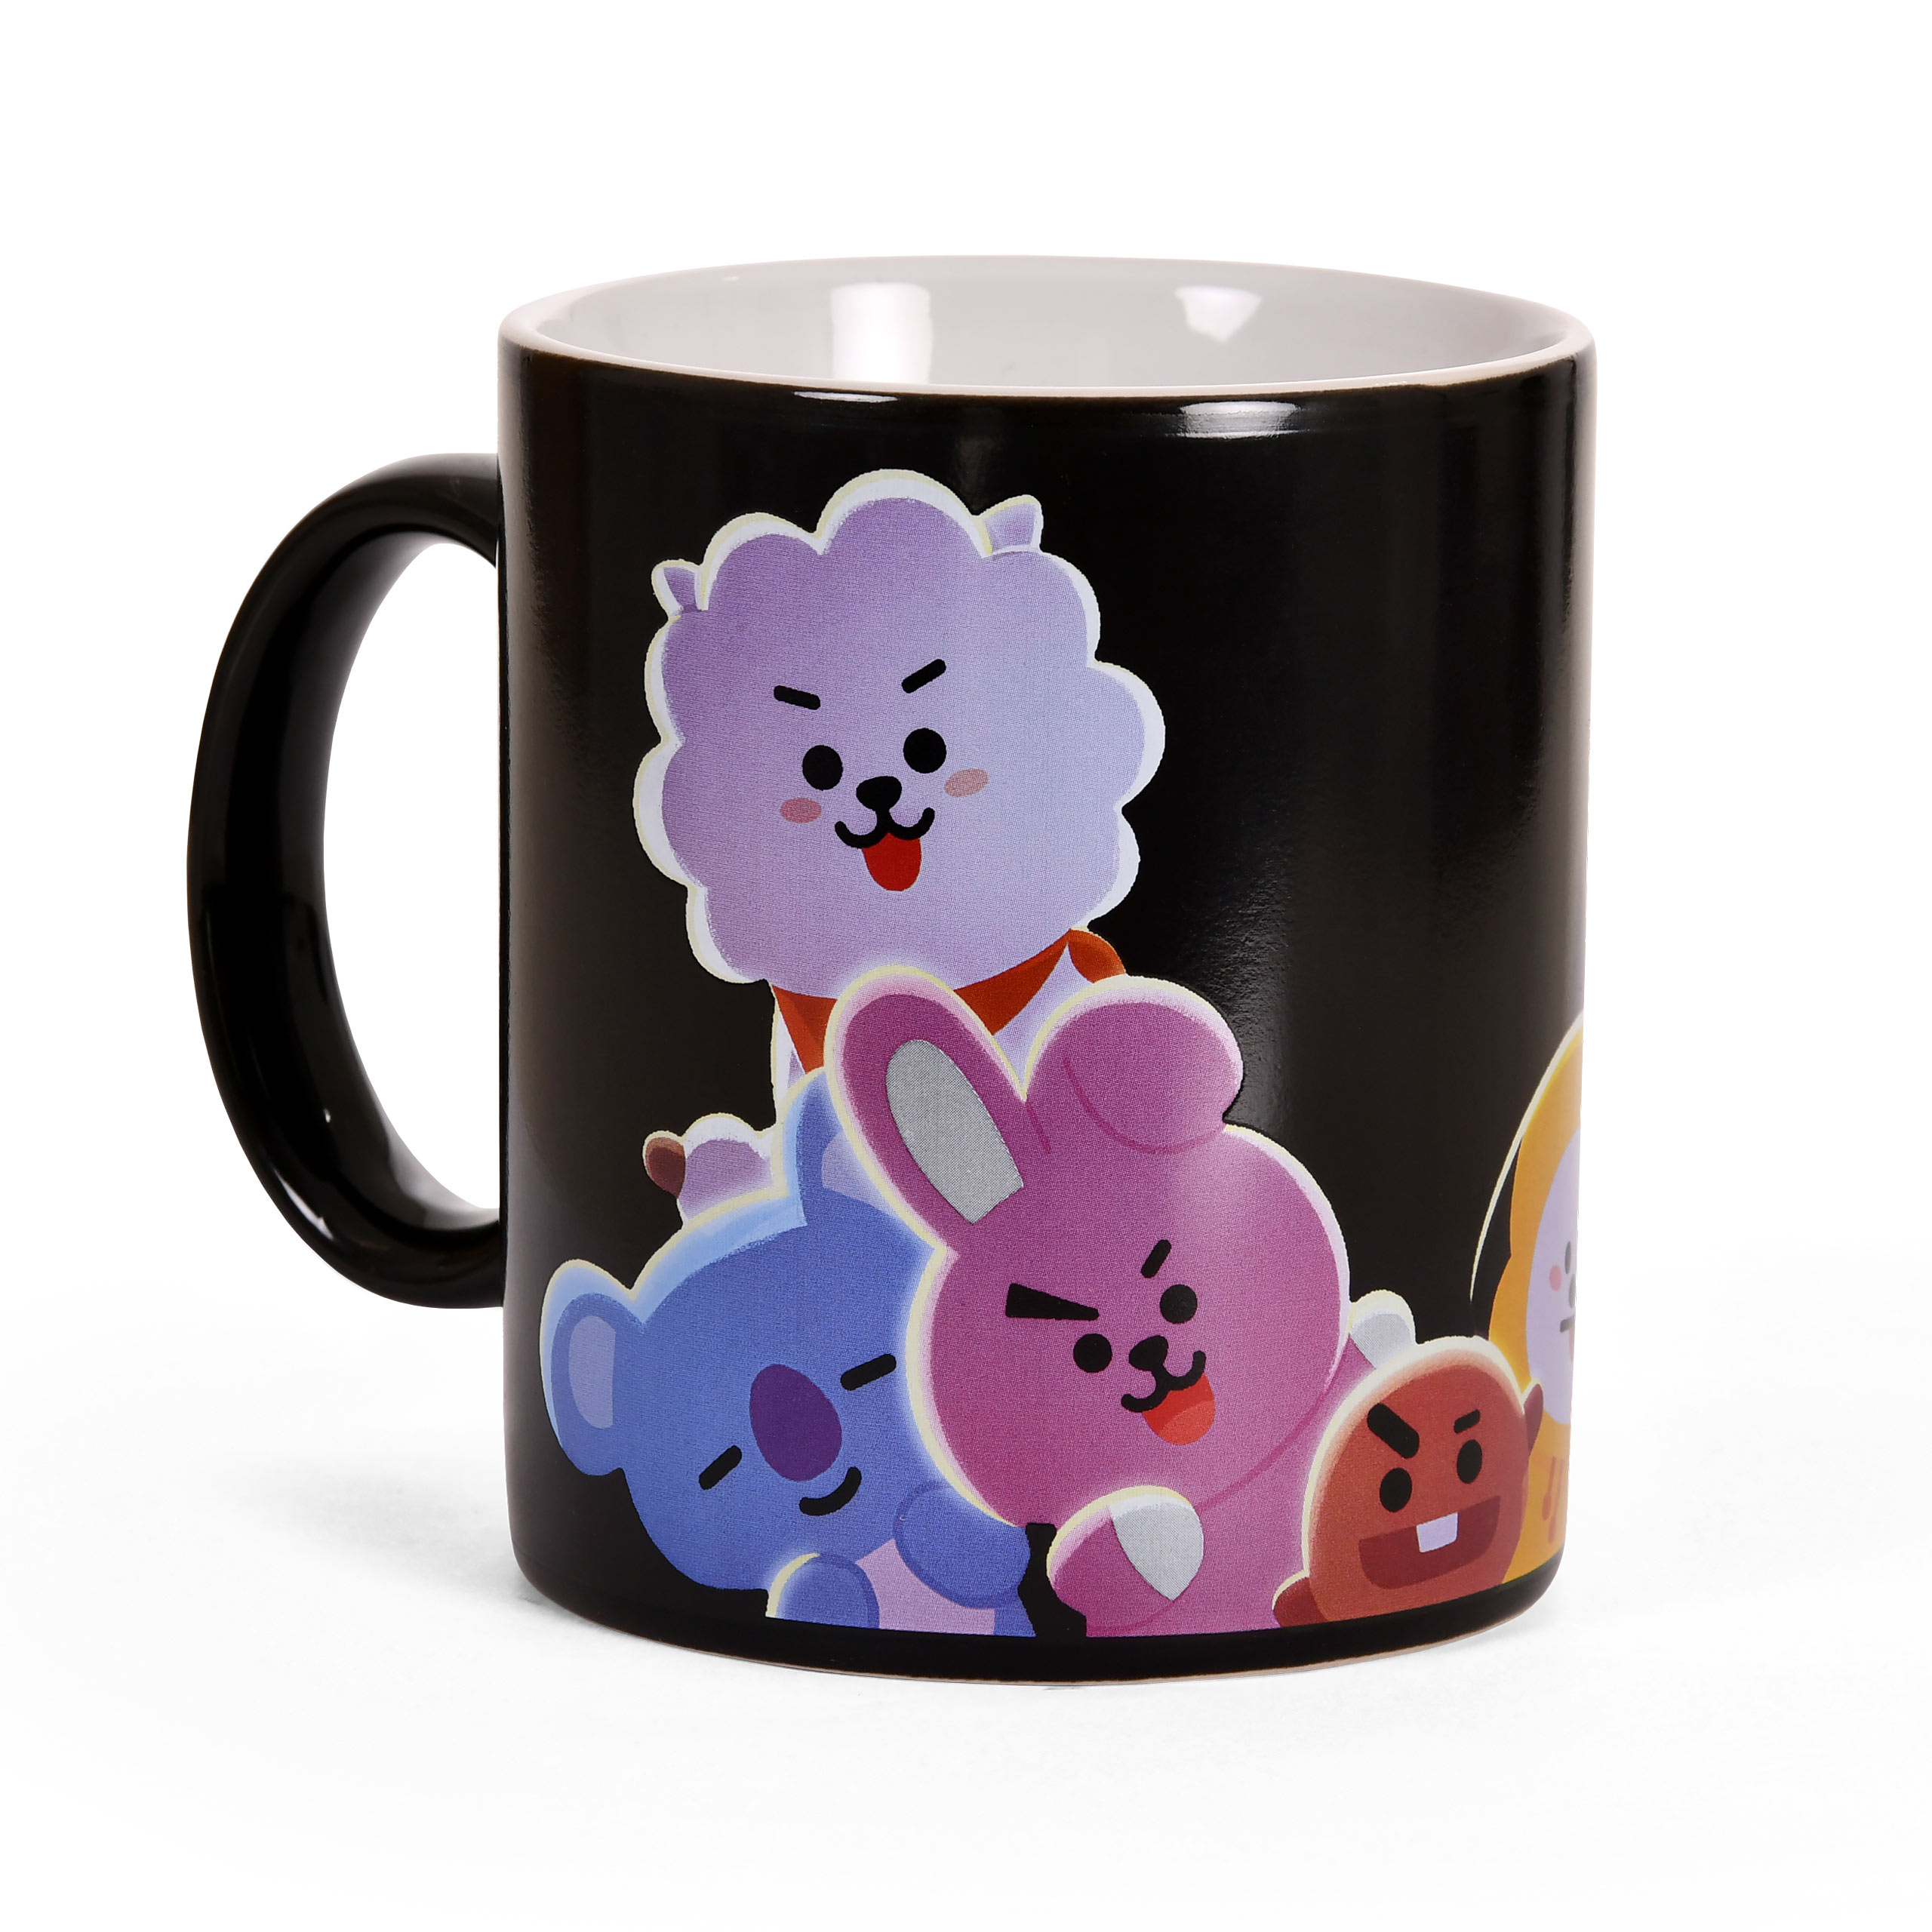 BT21 Times Square Thermal Effect Mug - Line Friends